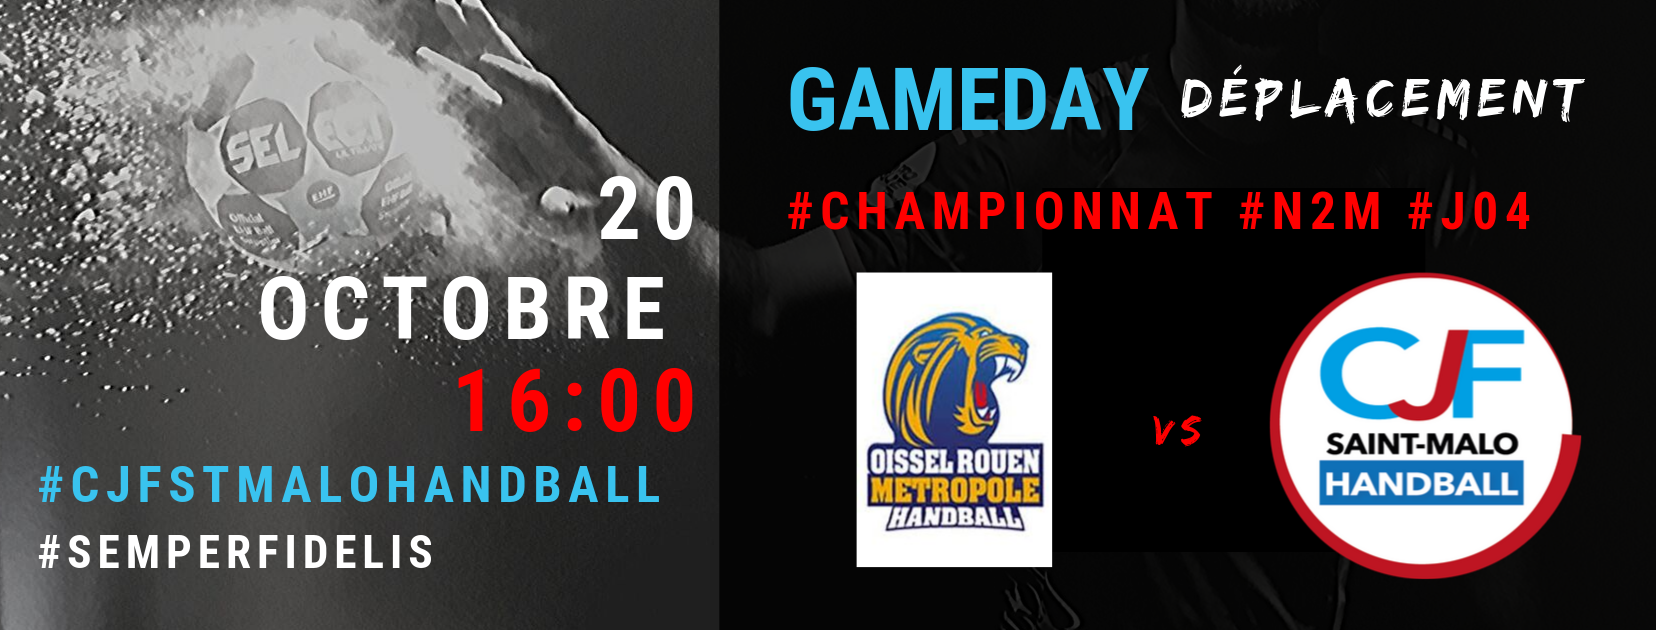 Gameday_ANNONCE_N2M_20102019